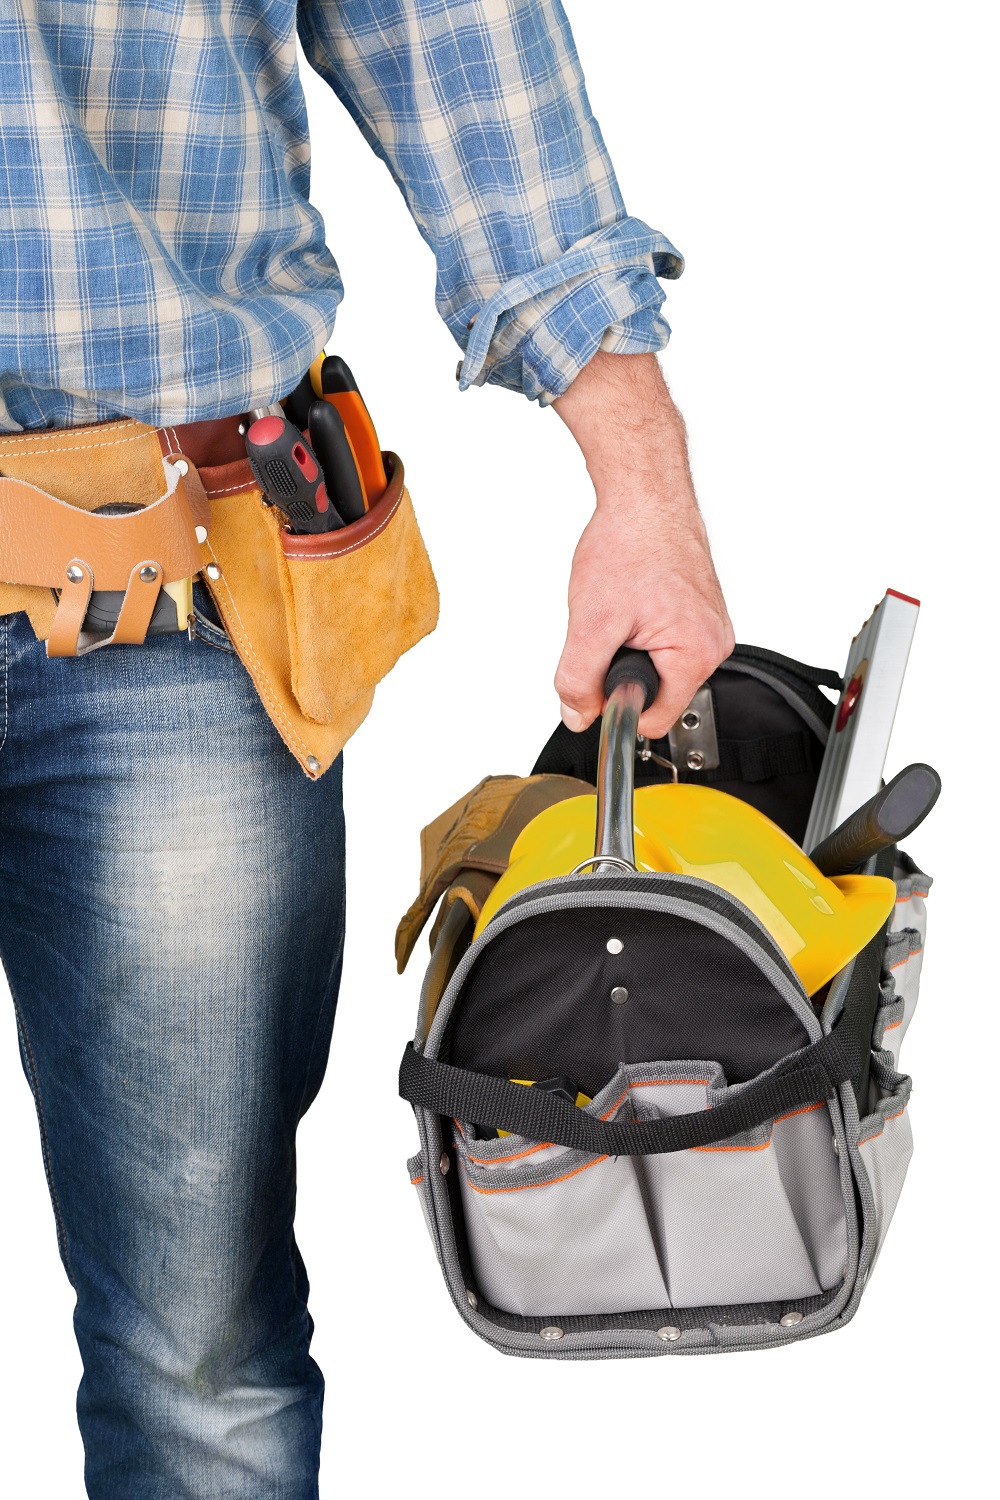 Construction worker carying one of the best tool bags